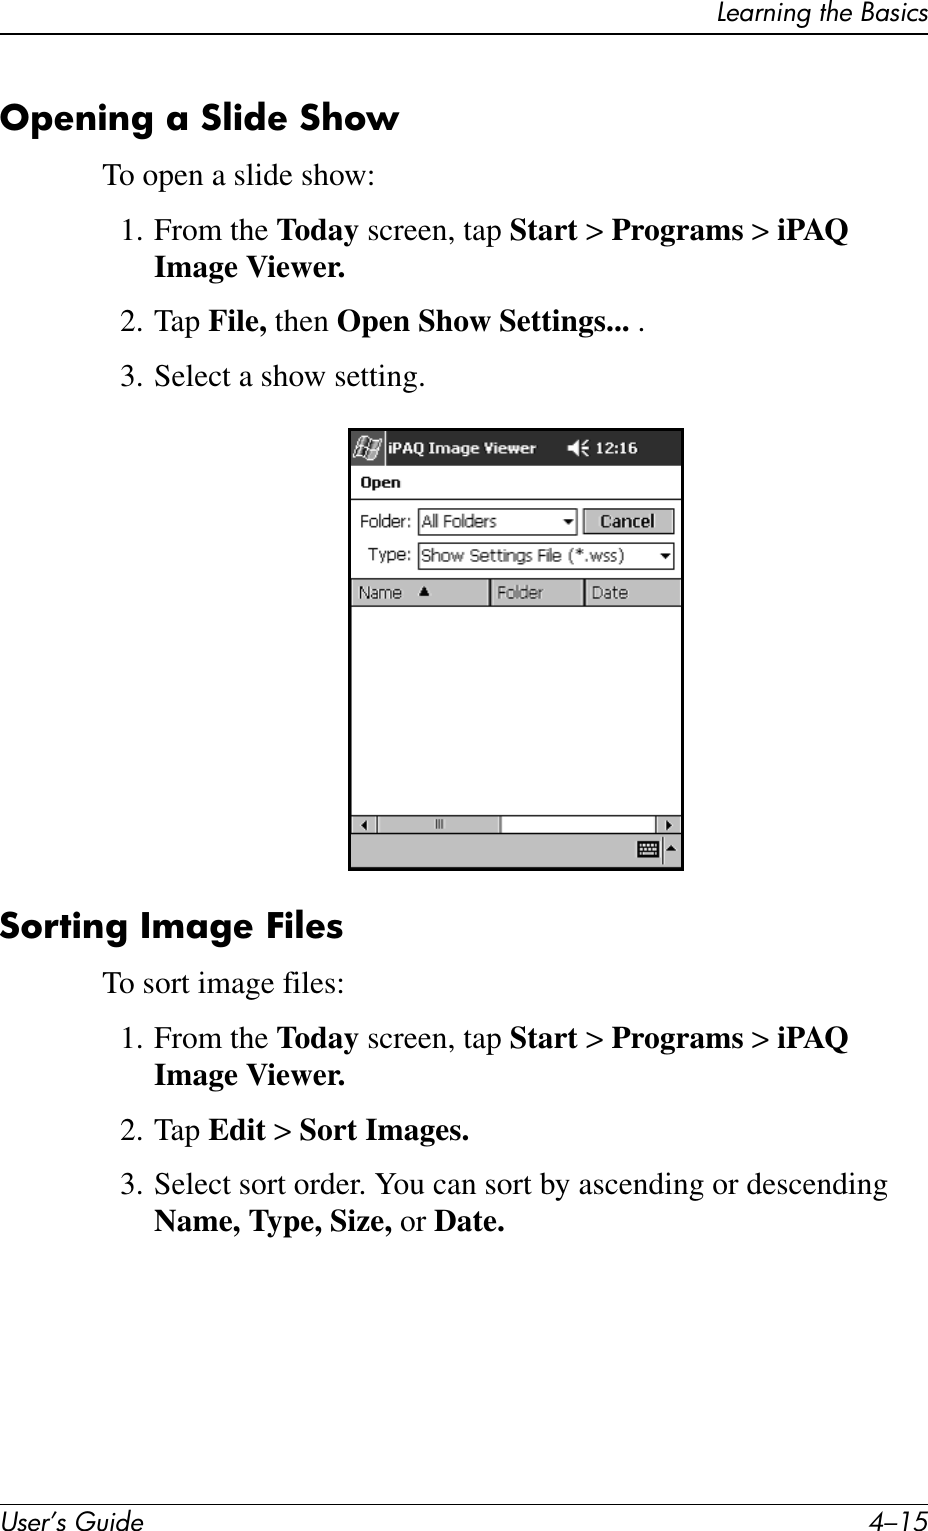 Learning the BasicsUser’s Guide 4–15Opening a Slide ShowTo open a slide show:1. From the Today screen, tap Start &gt; Programs &gt; iPAQ Image Viewer.2. Tap File, then Open Show Settings... .3. Select a show setting.Sorting Image FilesTo sort image files:1. From the Today screen, tap Start &gt; Programs &gt; iPAQ Image Viewer.2. Tap Edit &gt; Sort Images.3. Select sort order. You can sort by ascending or descending Name, Type, Size, or Date.